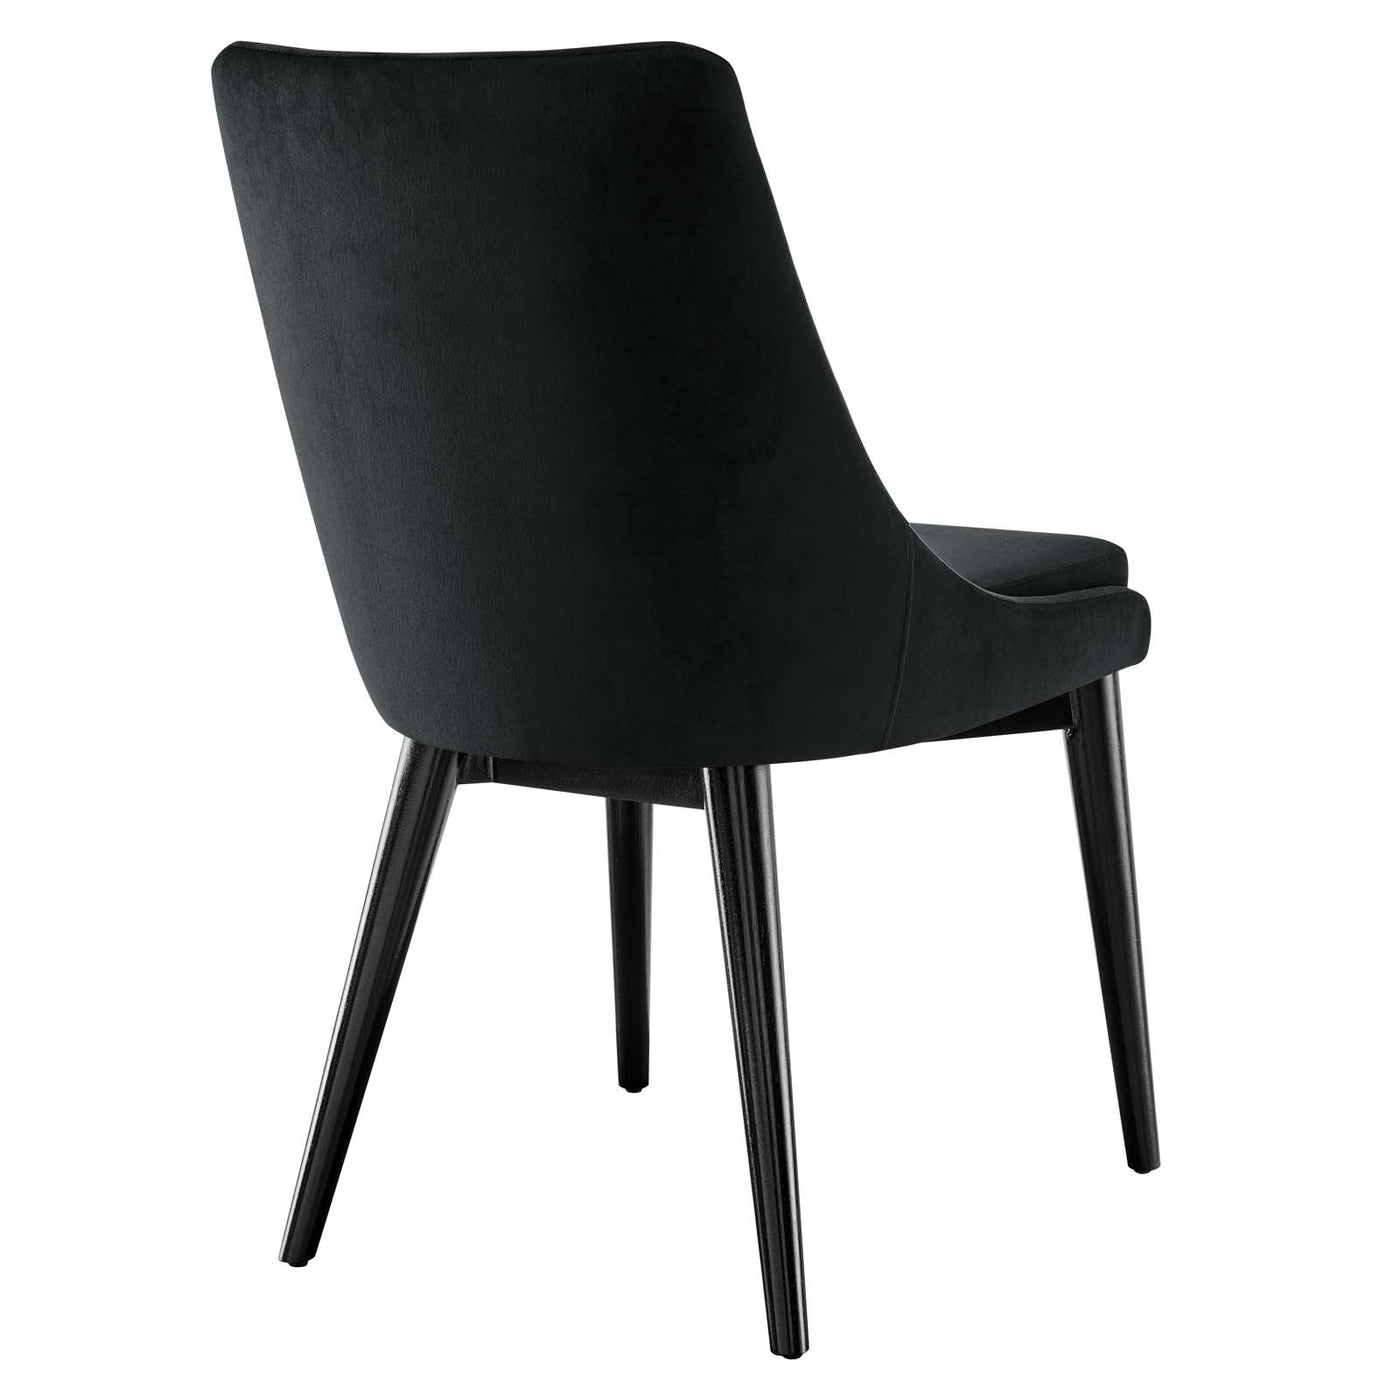 Viscount Accent Performance Velvet Dining Chairs - Set of 2